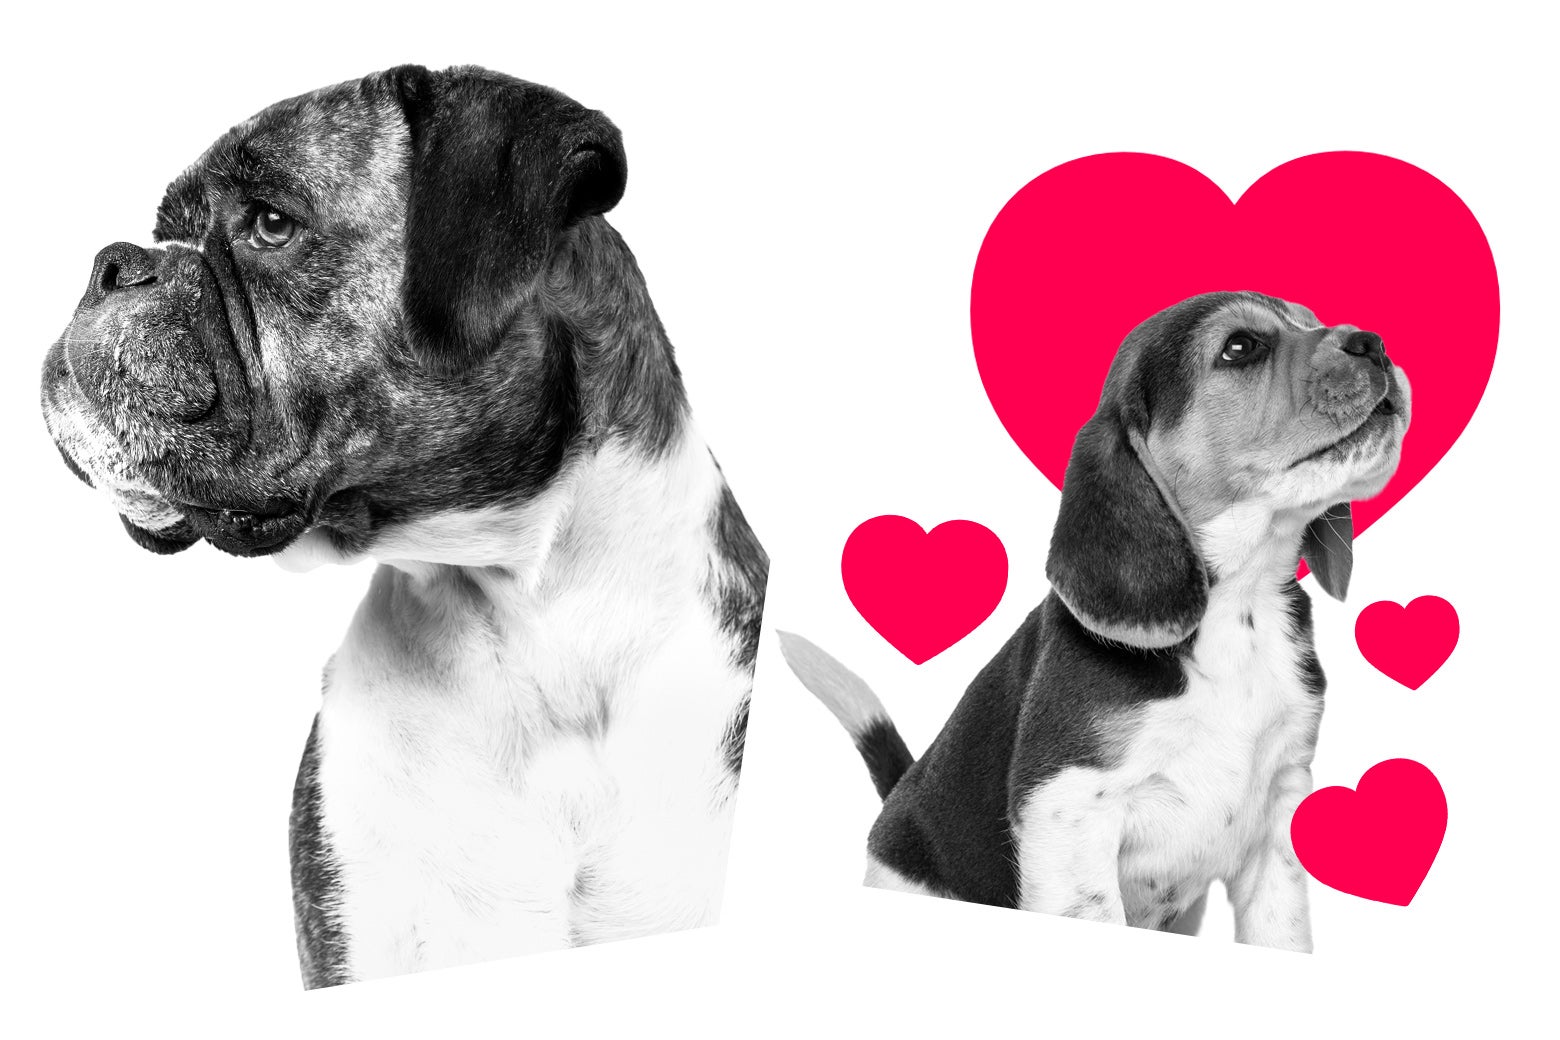 Two dogs facing away from each other. The puppy on the right is covered in hearts.